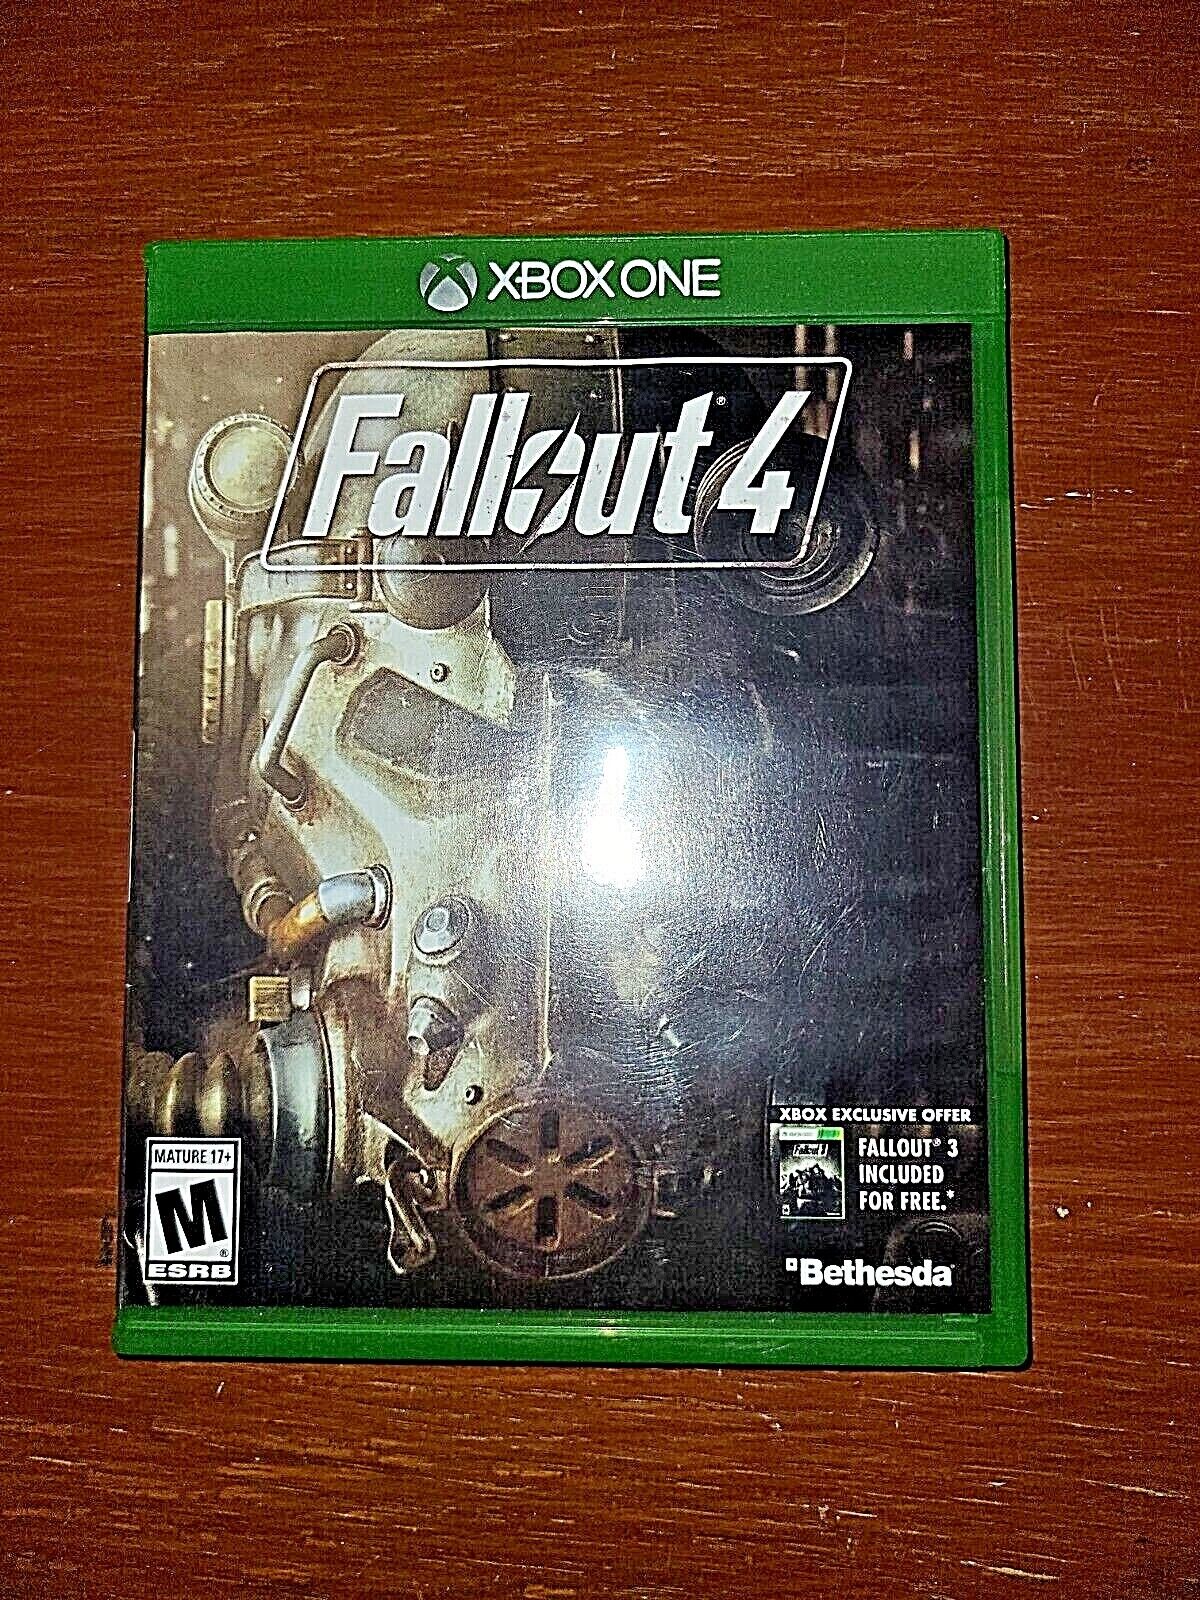 Luchtvaartmaatschappijen transactie viool Fallout 4 for Xbox One XBOX-ONE(XB1) Complete w/ Map and Inserts CIB Tested  93155170421 | eBay